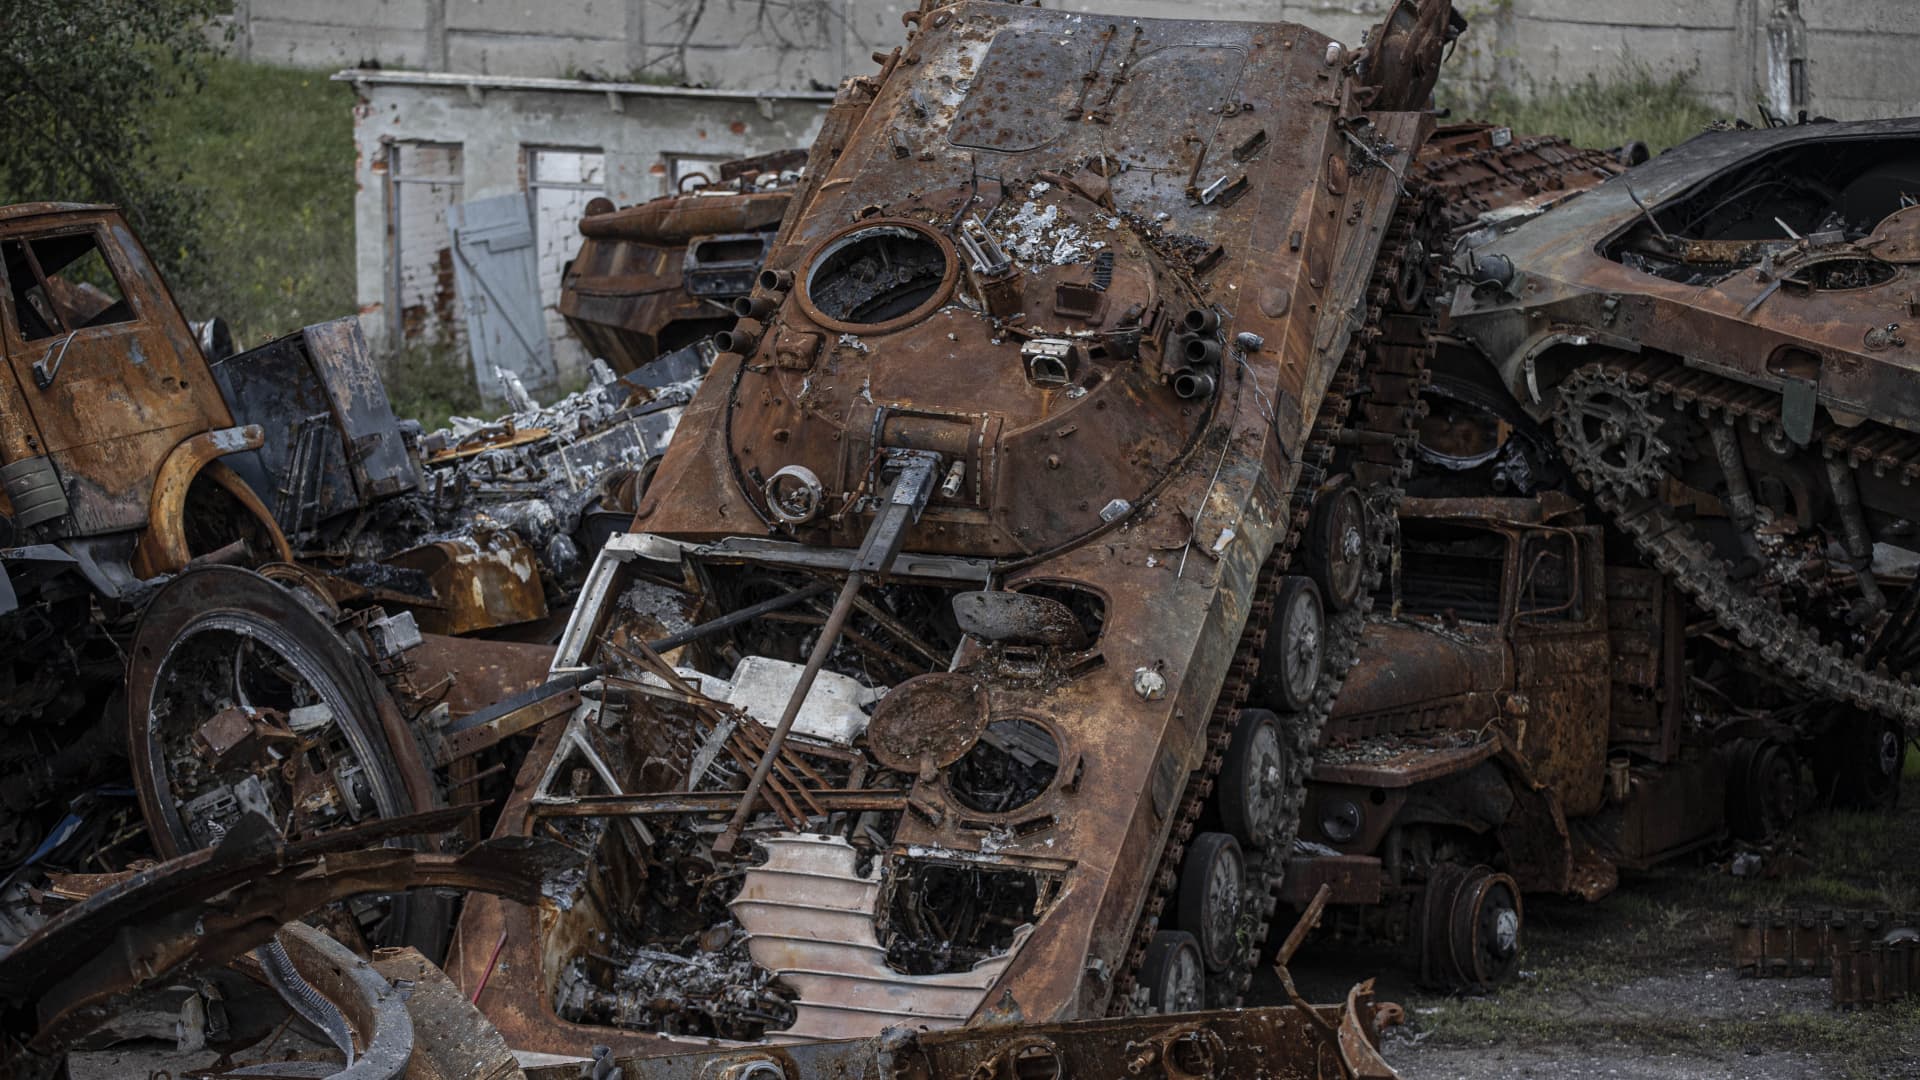 Destroyed armored vehicles and tanks belonging to Russian forces, after they withdrew from the city of Lyman in the Donetsk region in Ukraine on Oct. 5, 2022.